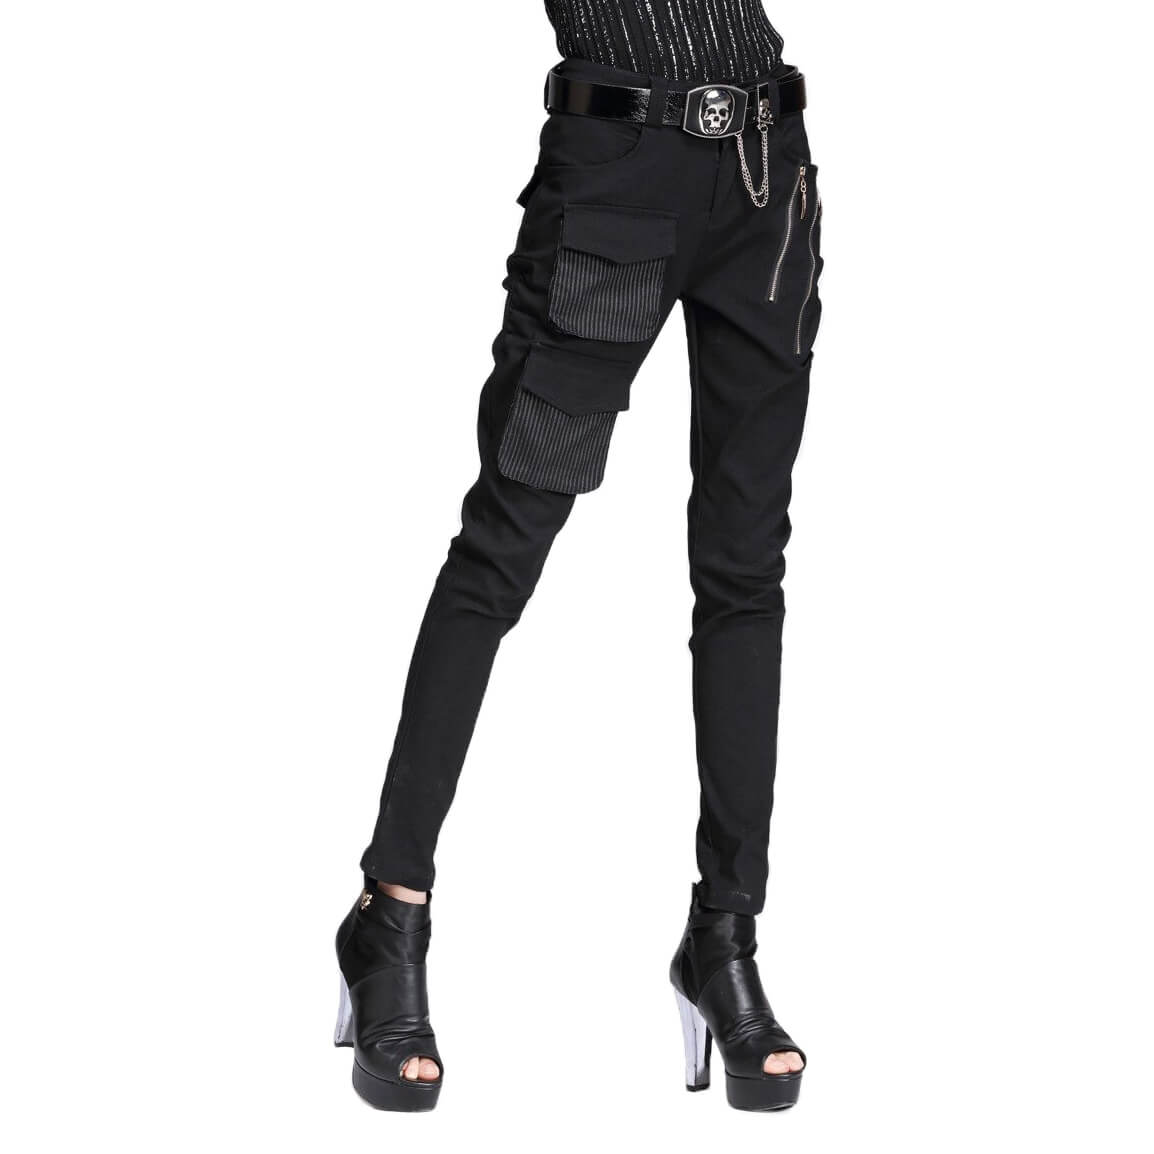 Gothic Style Women's Black Pencil Pants / High-quality Elastic Waist Stretchable Material Pants - HARD'N'HEAVY